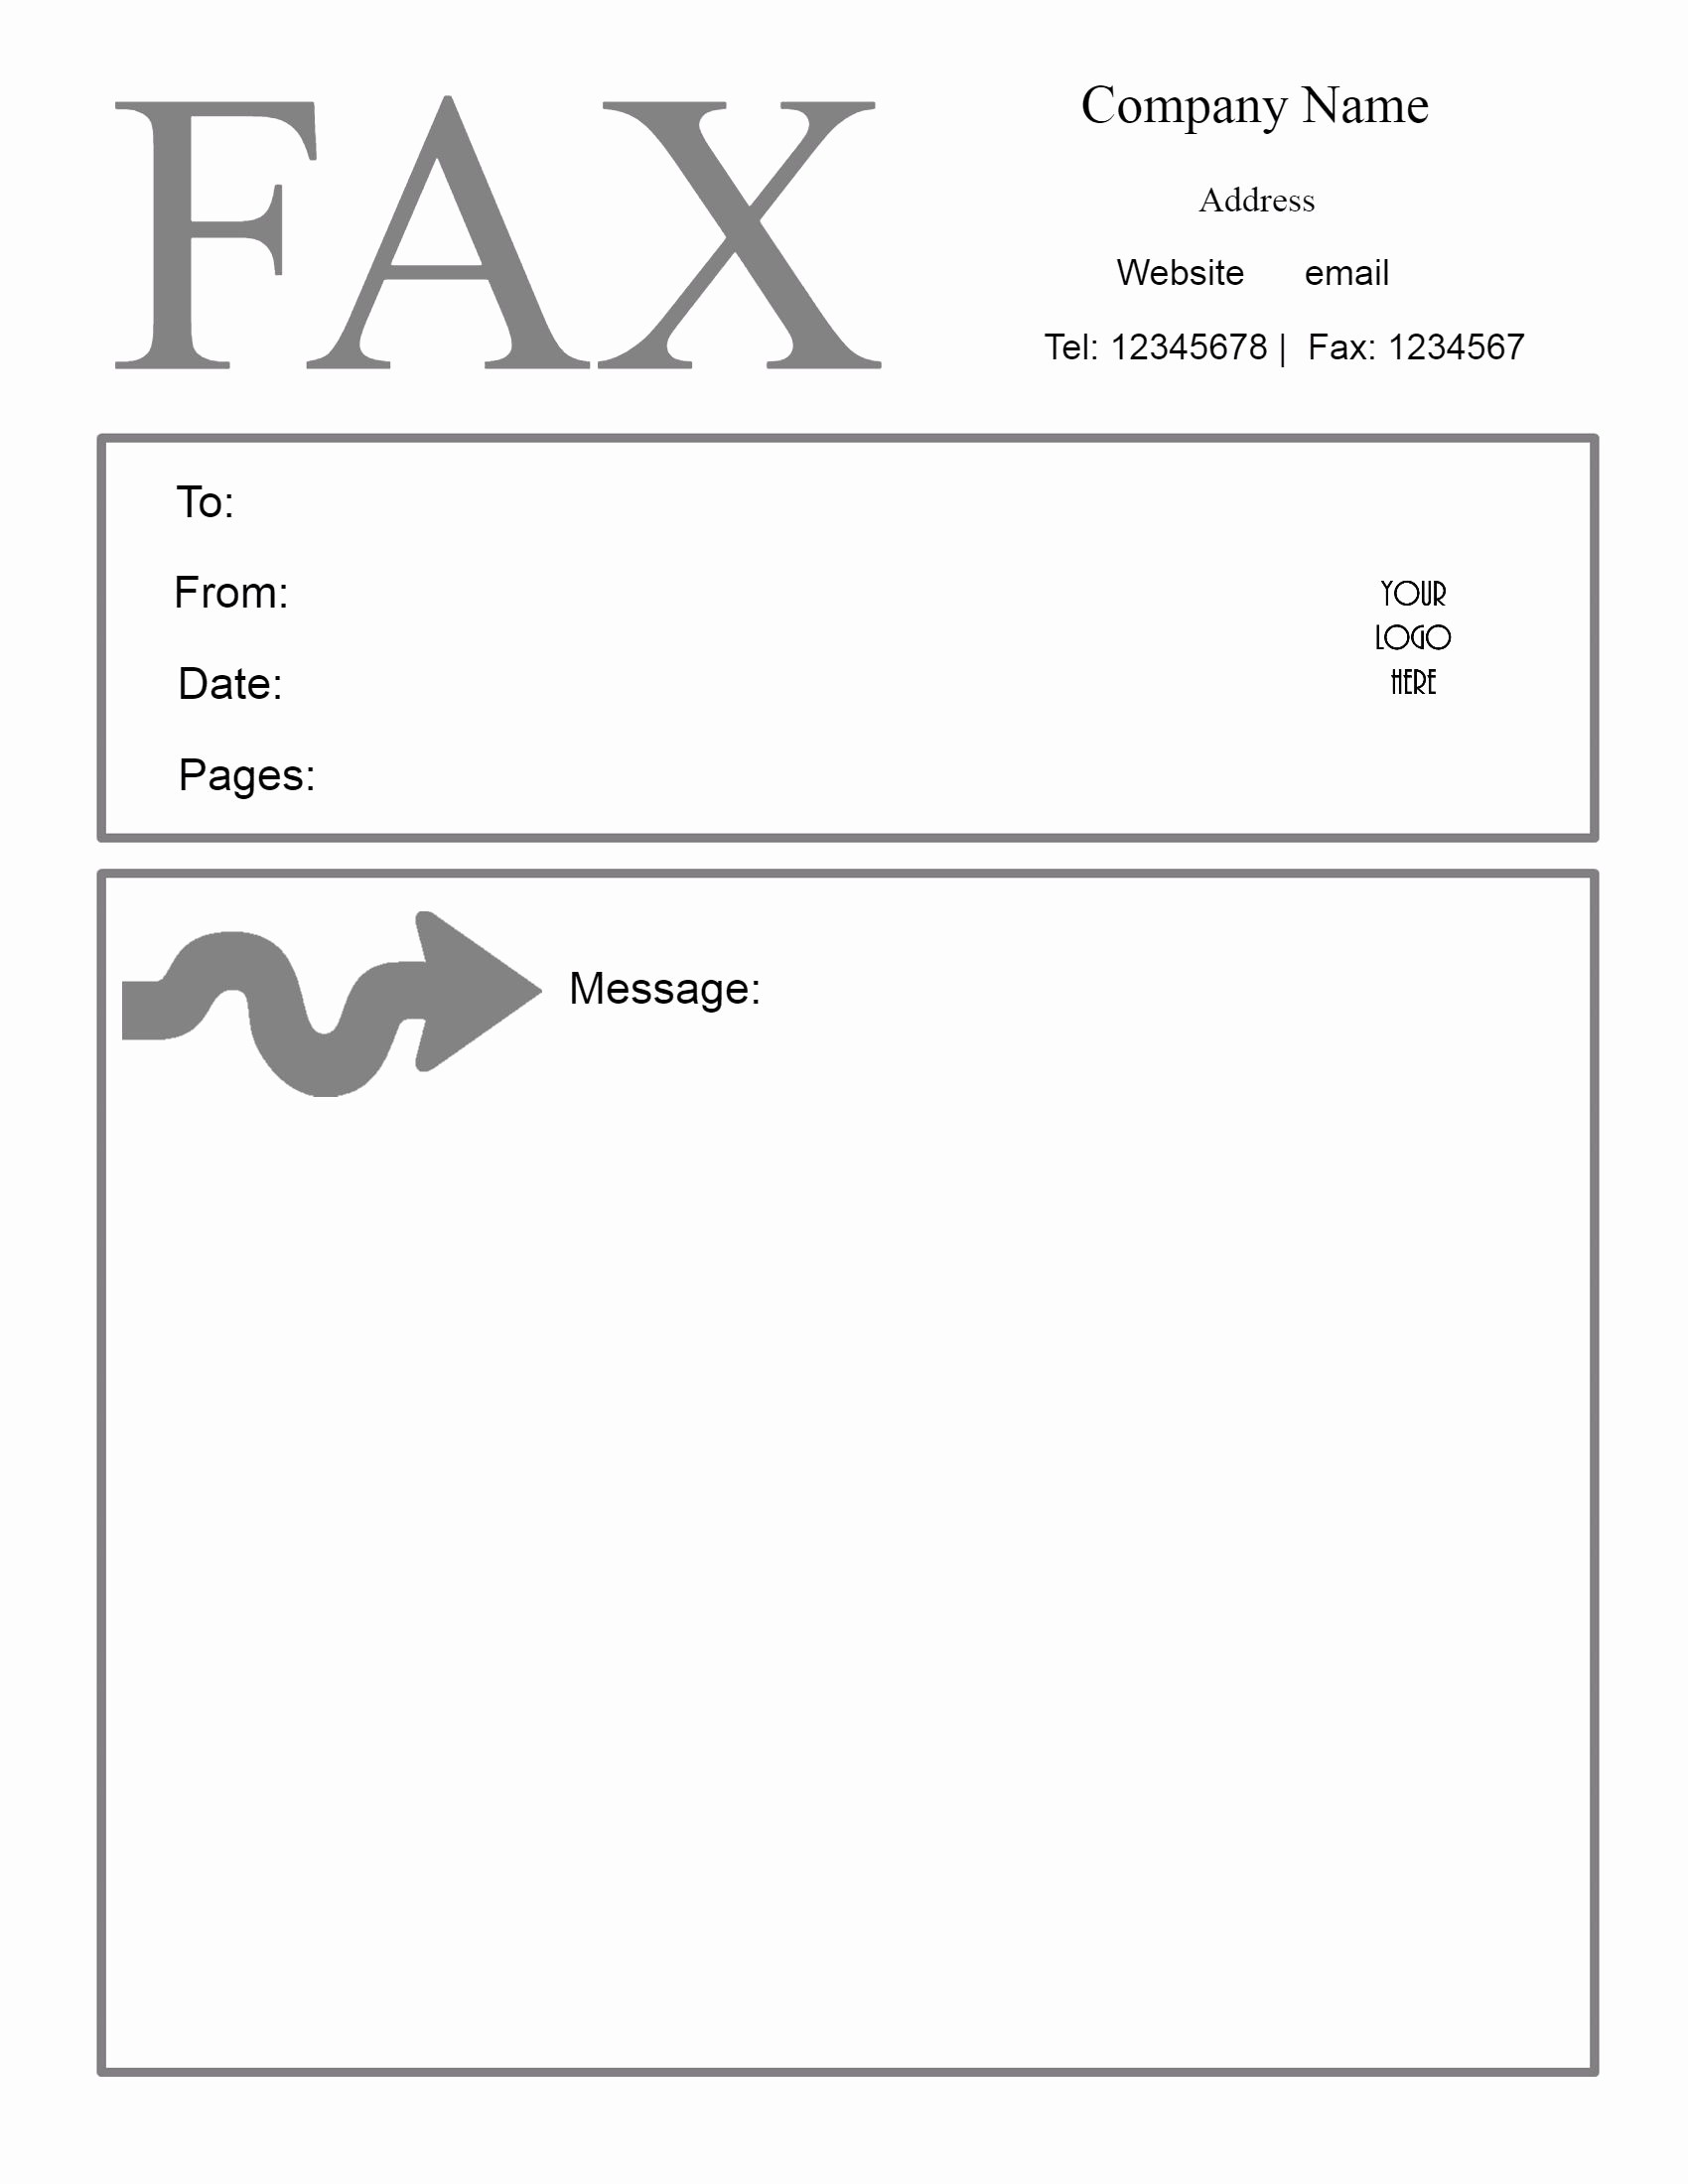 How to Fax Cover Sheet Inspirational Free Fax Cover Sheet Template